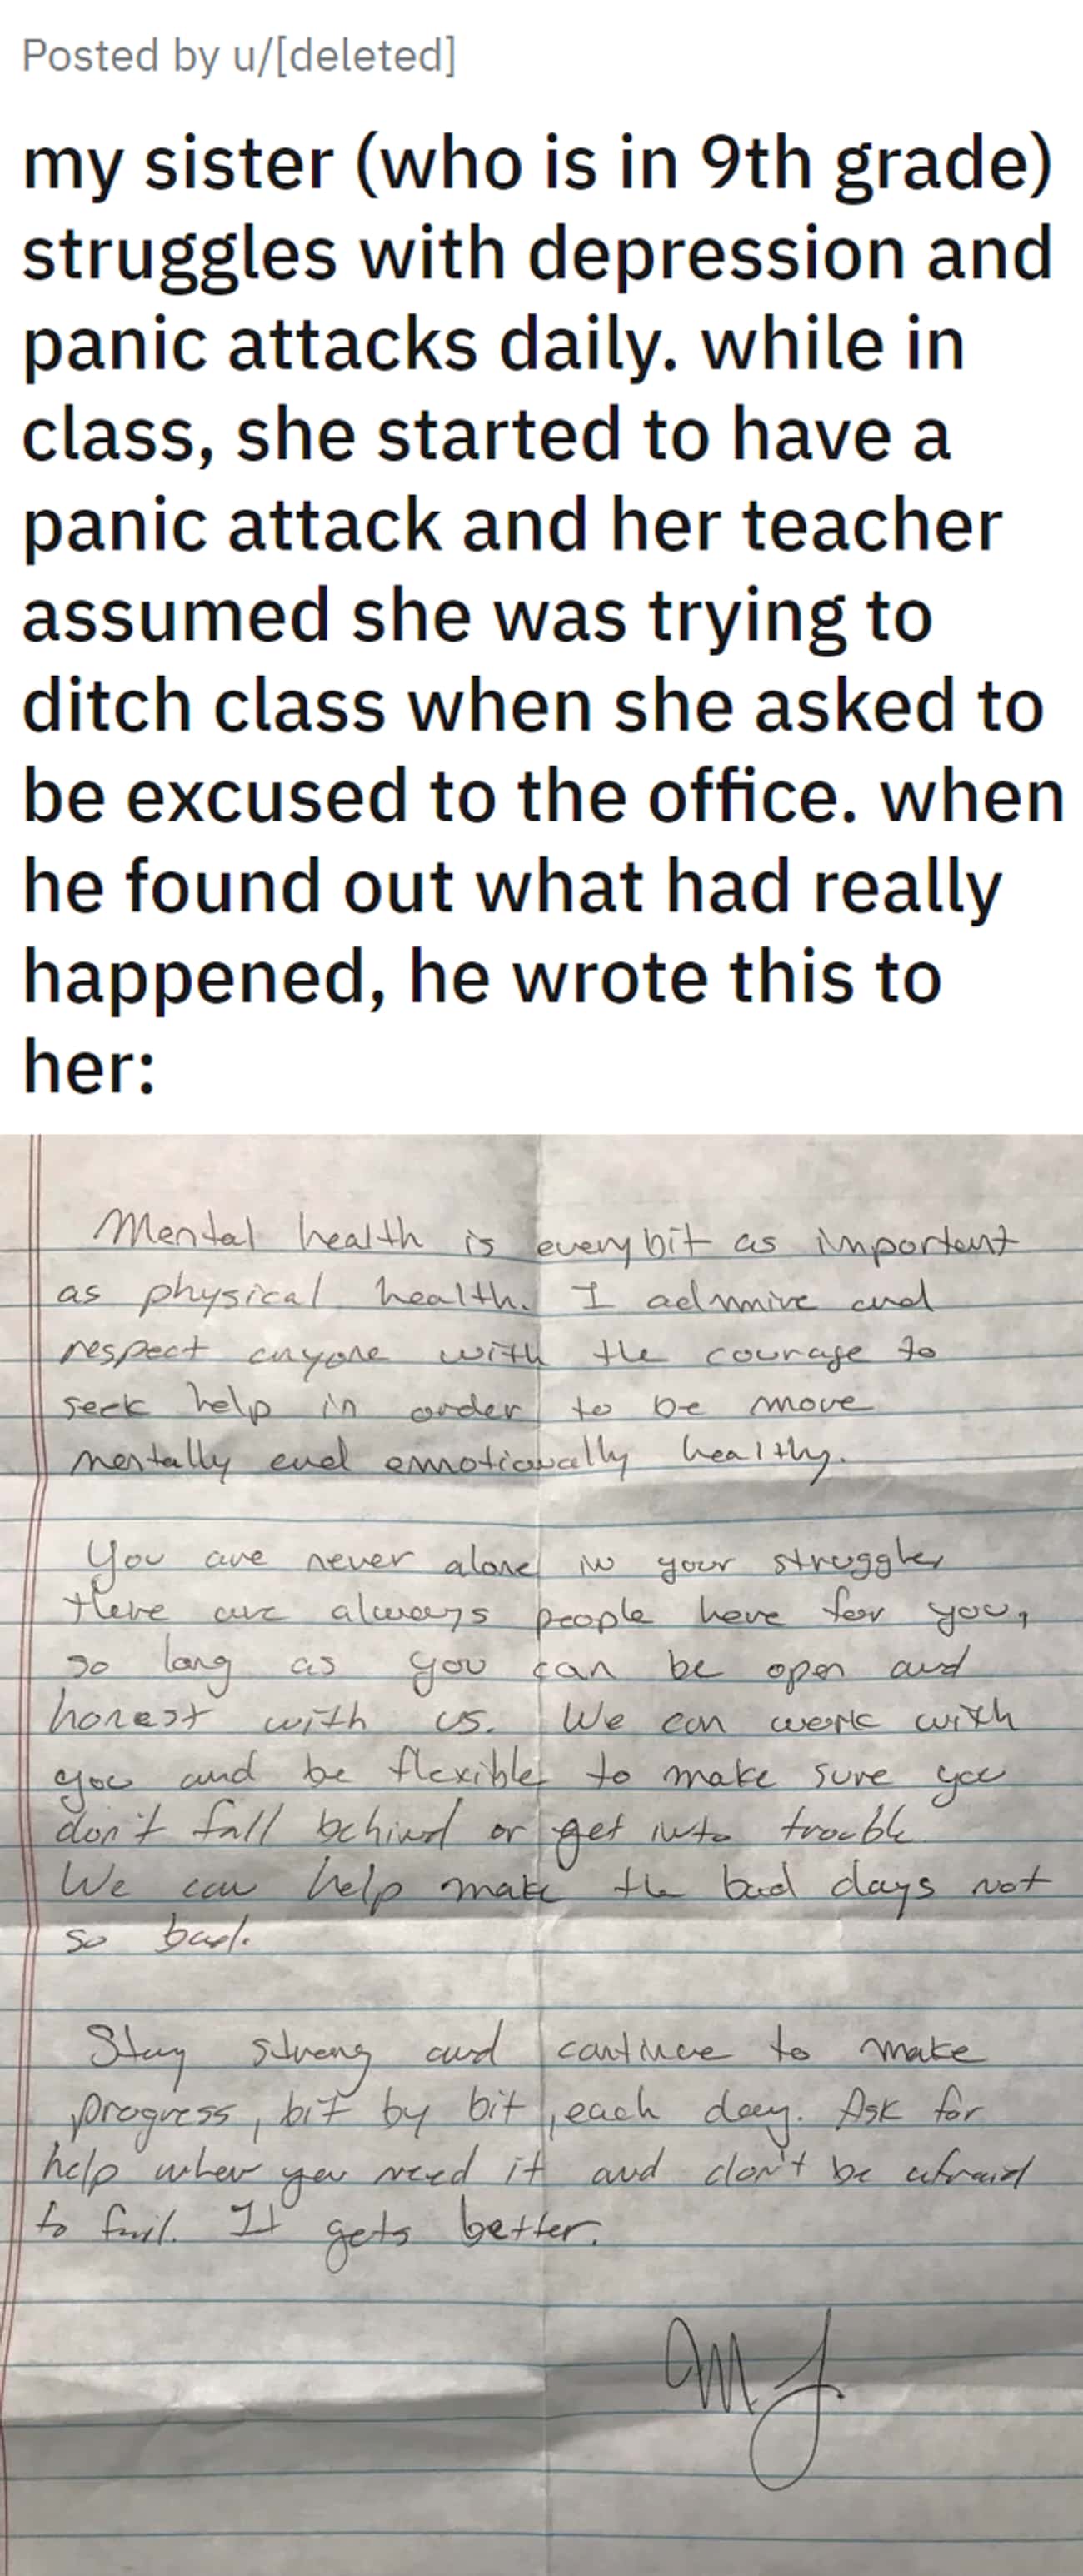 A Thoughtful Letter About Mental Health